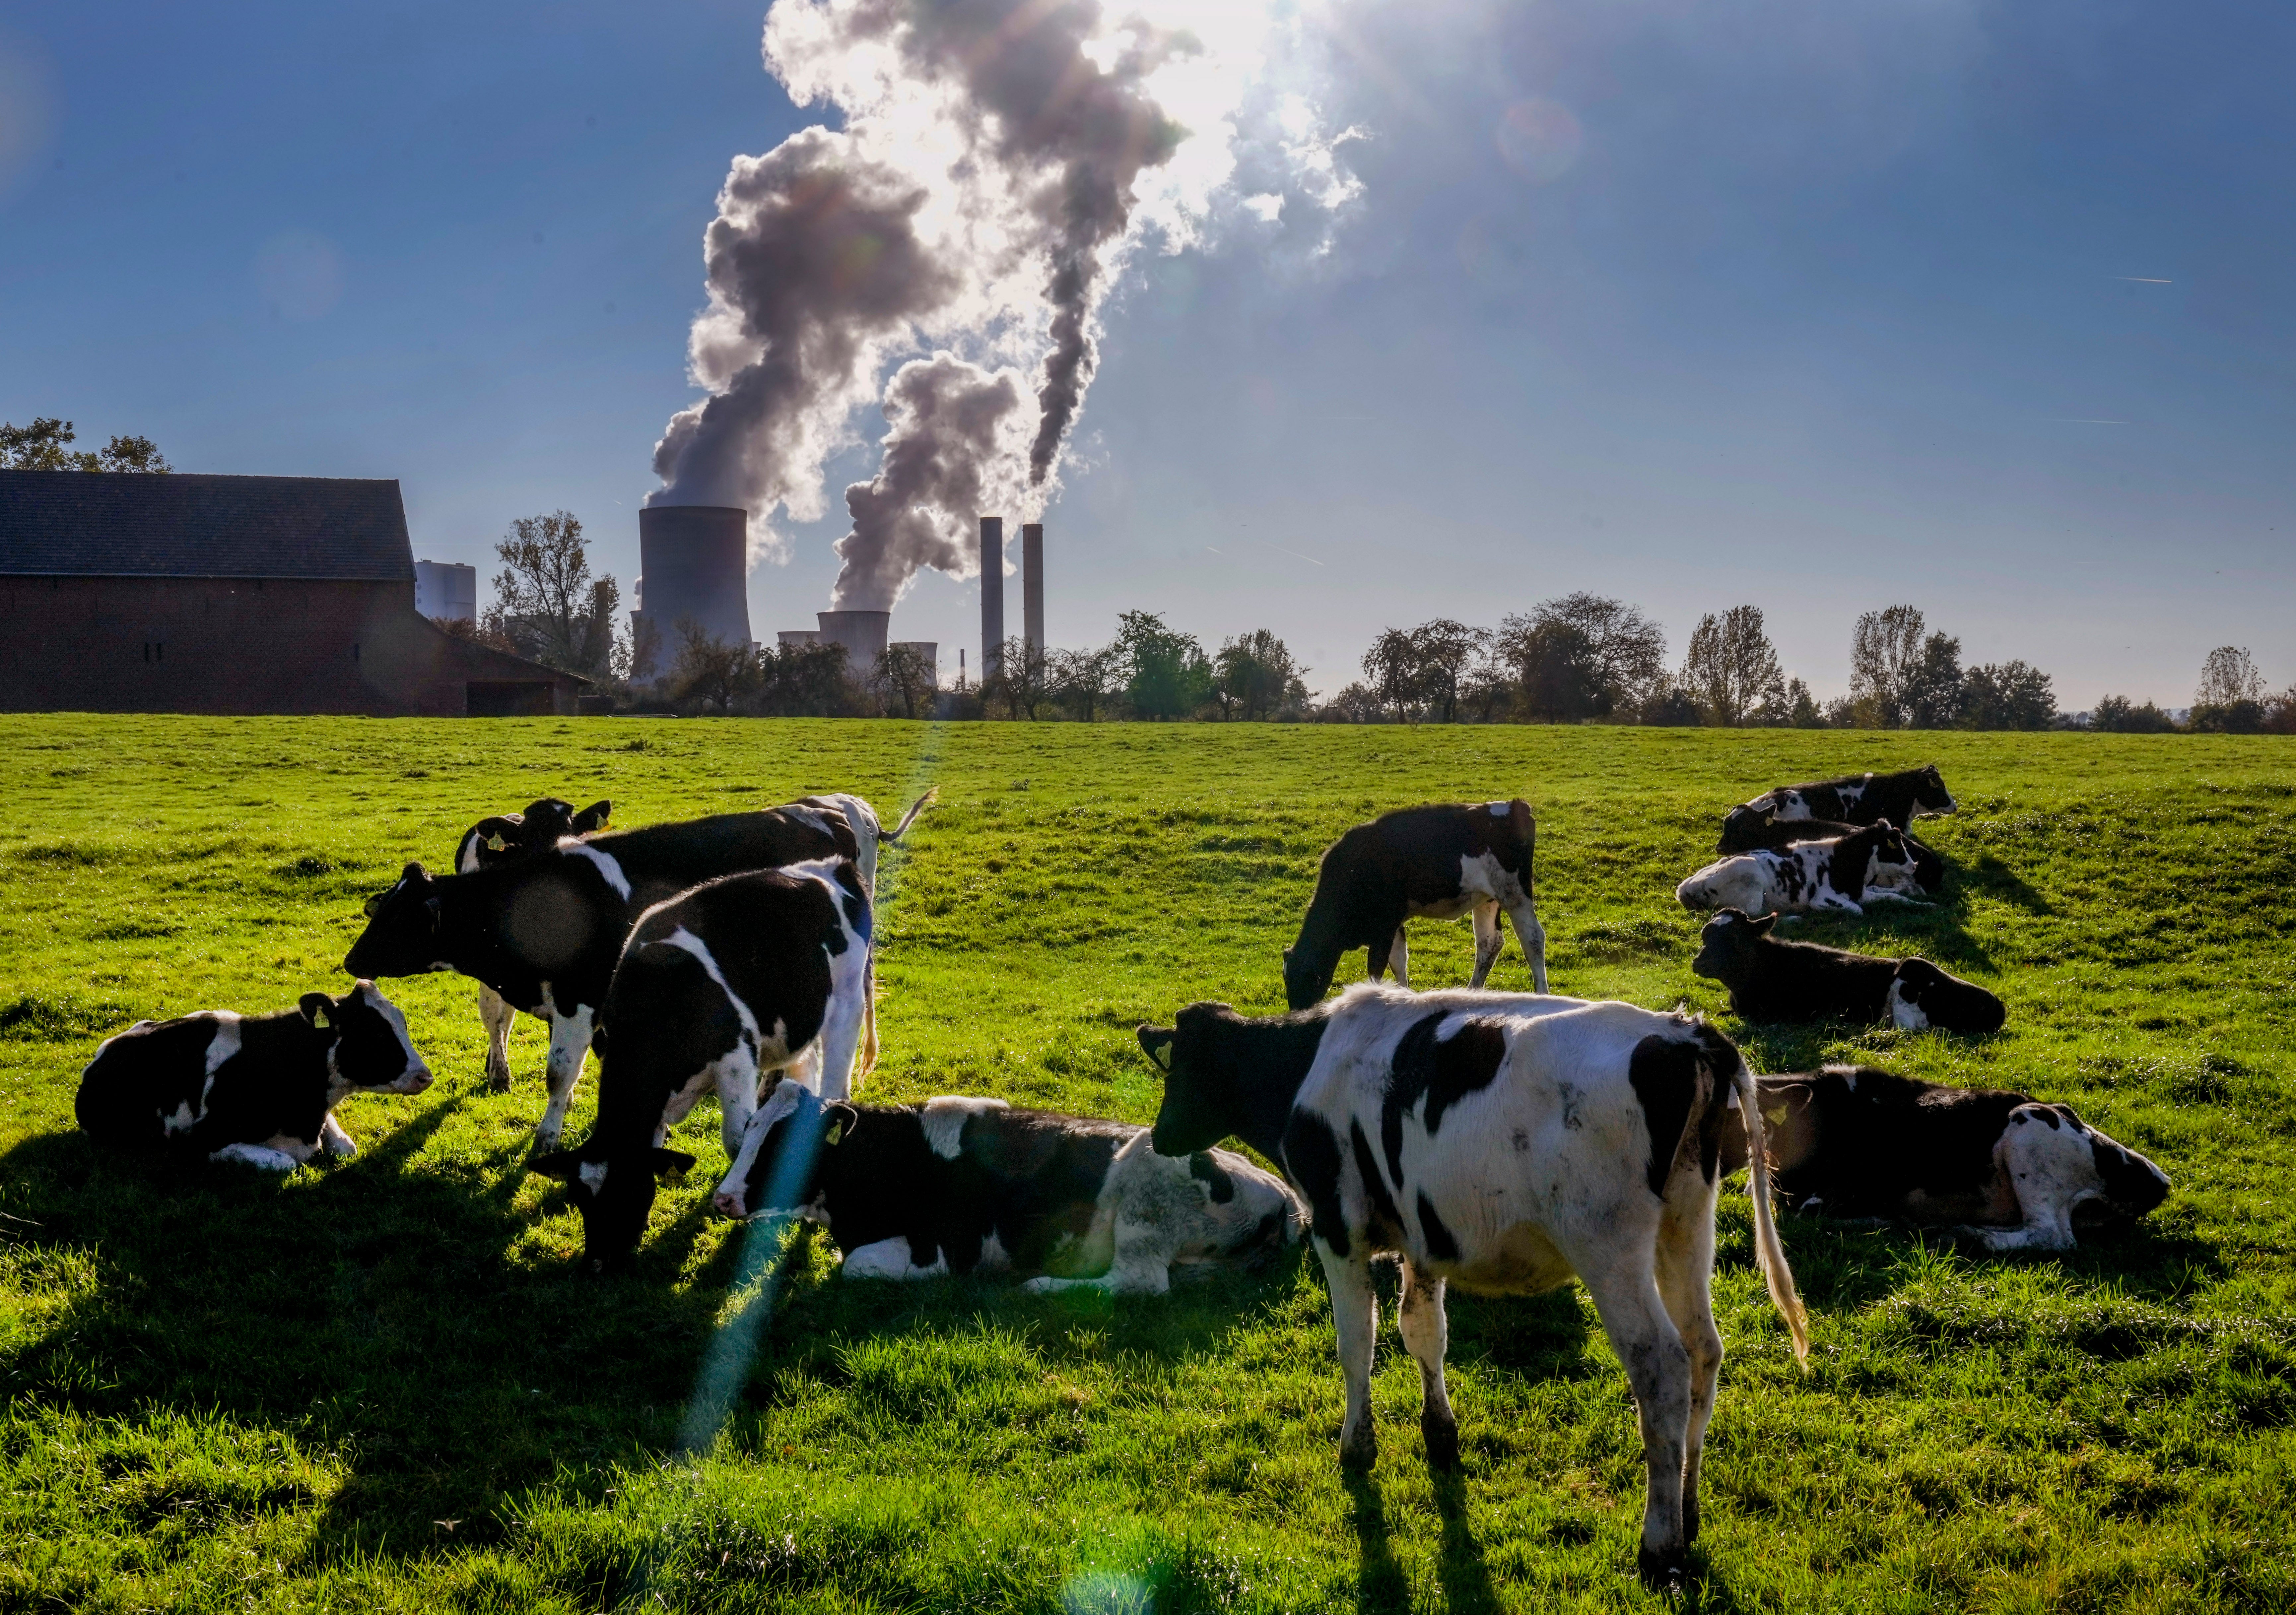 Cows gather near the coal-fired power station in Niederaussem, Germany